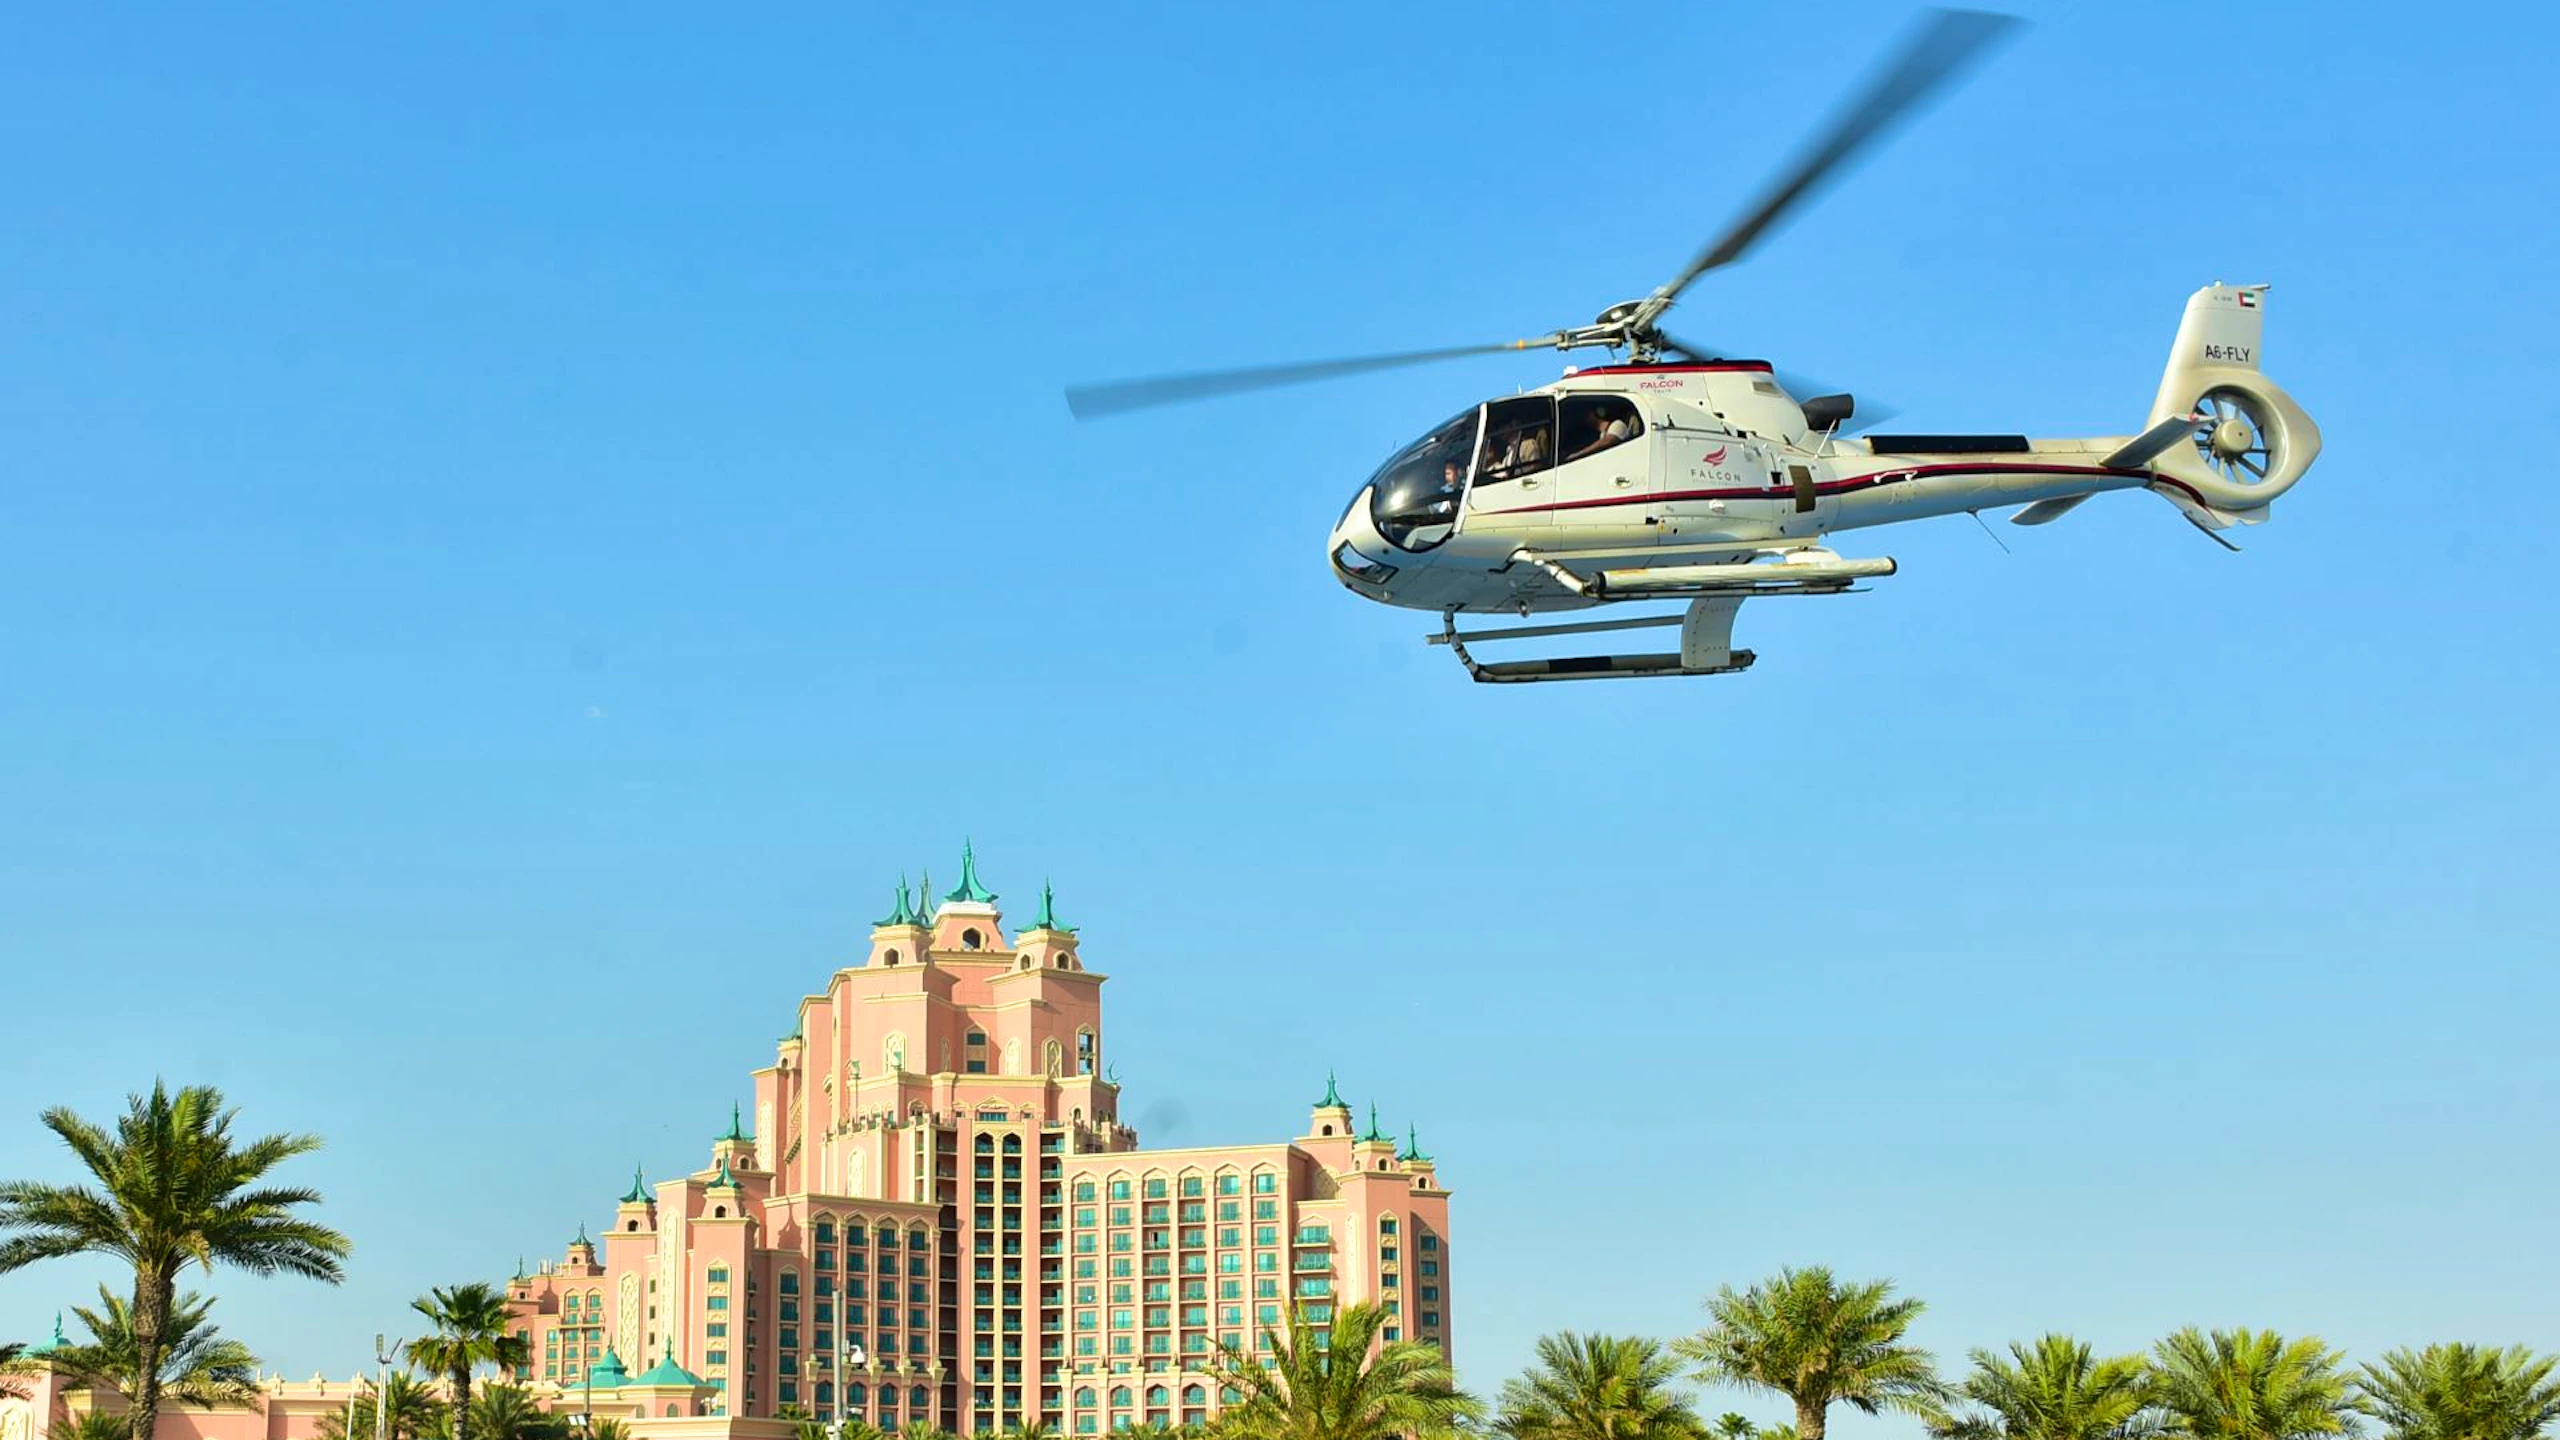 Dubai Helicopter Ride: An Aerial Adventure (17-Minutes) Location